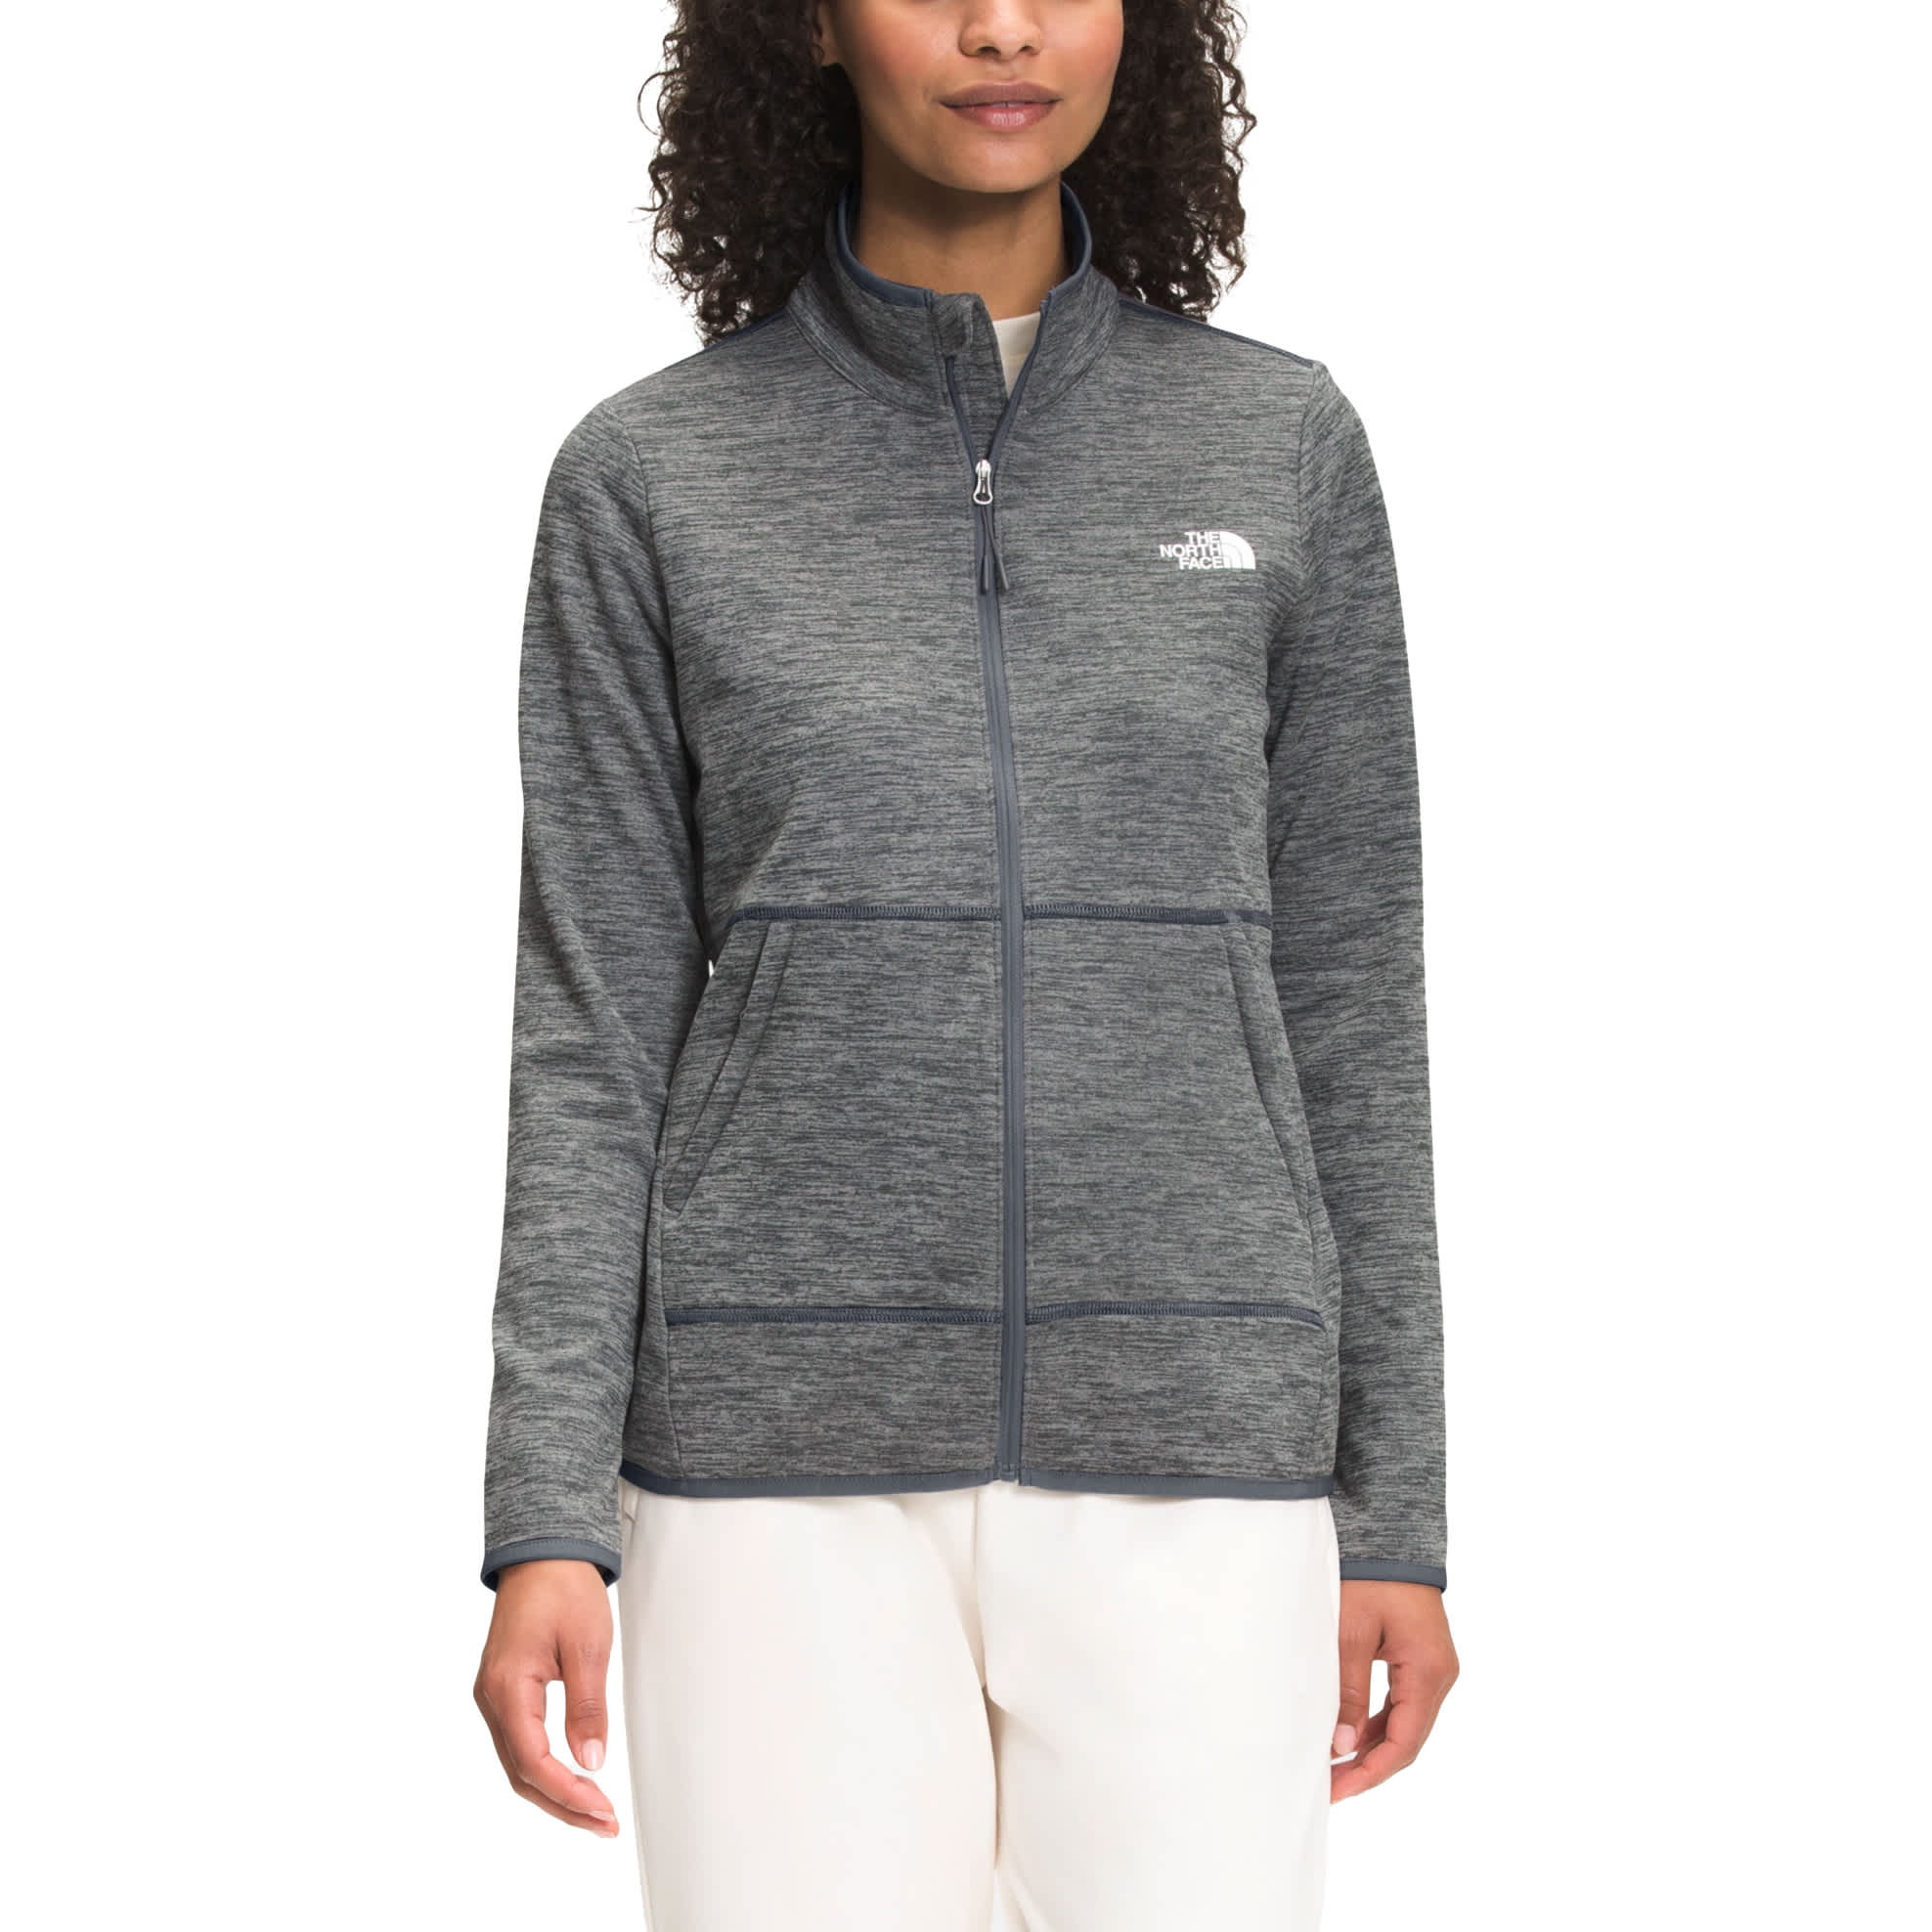 The North Face® Women’s Canyonlands Full-Zip Jacket